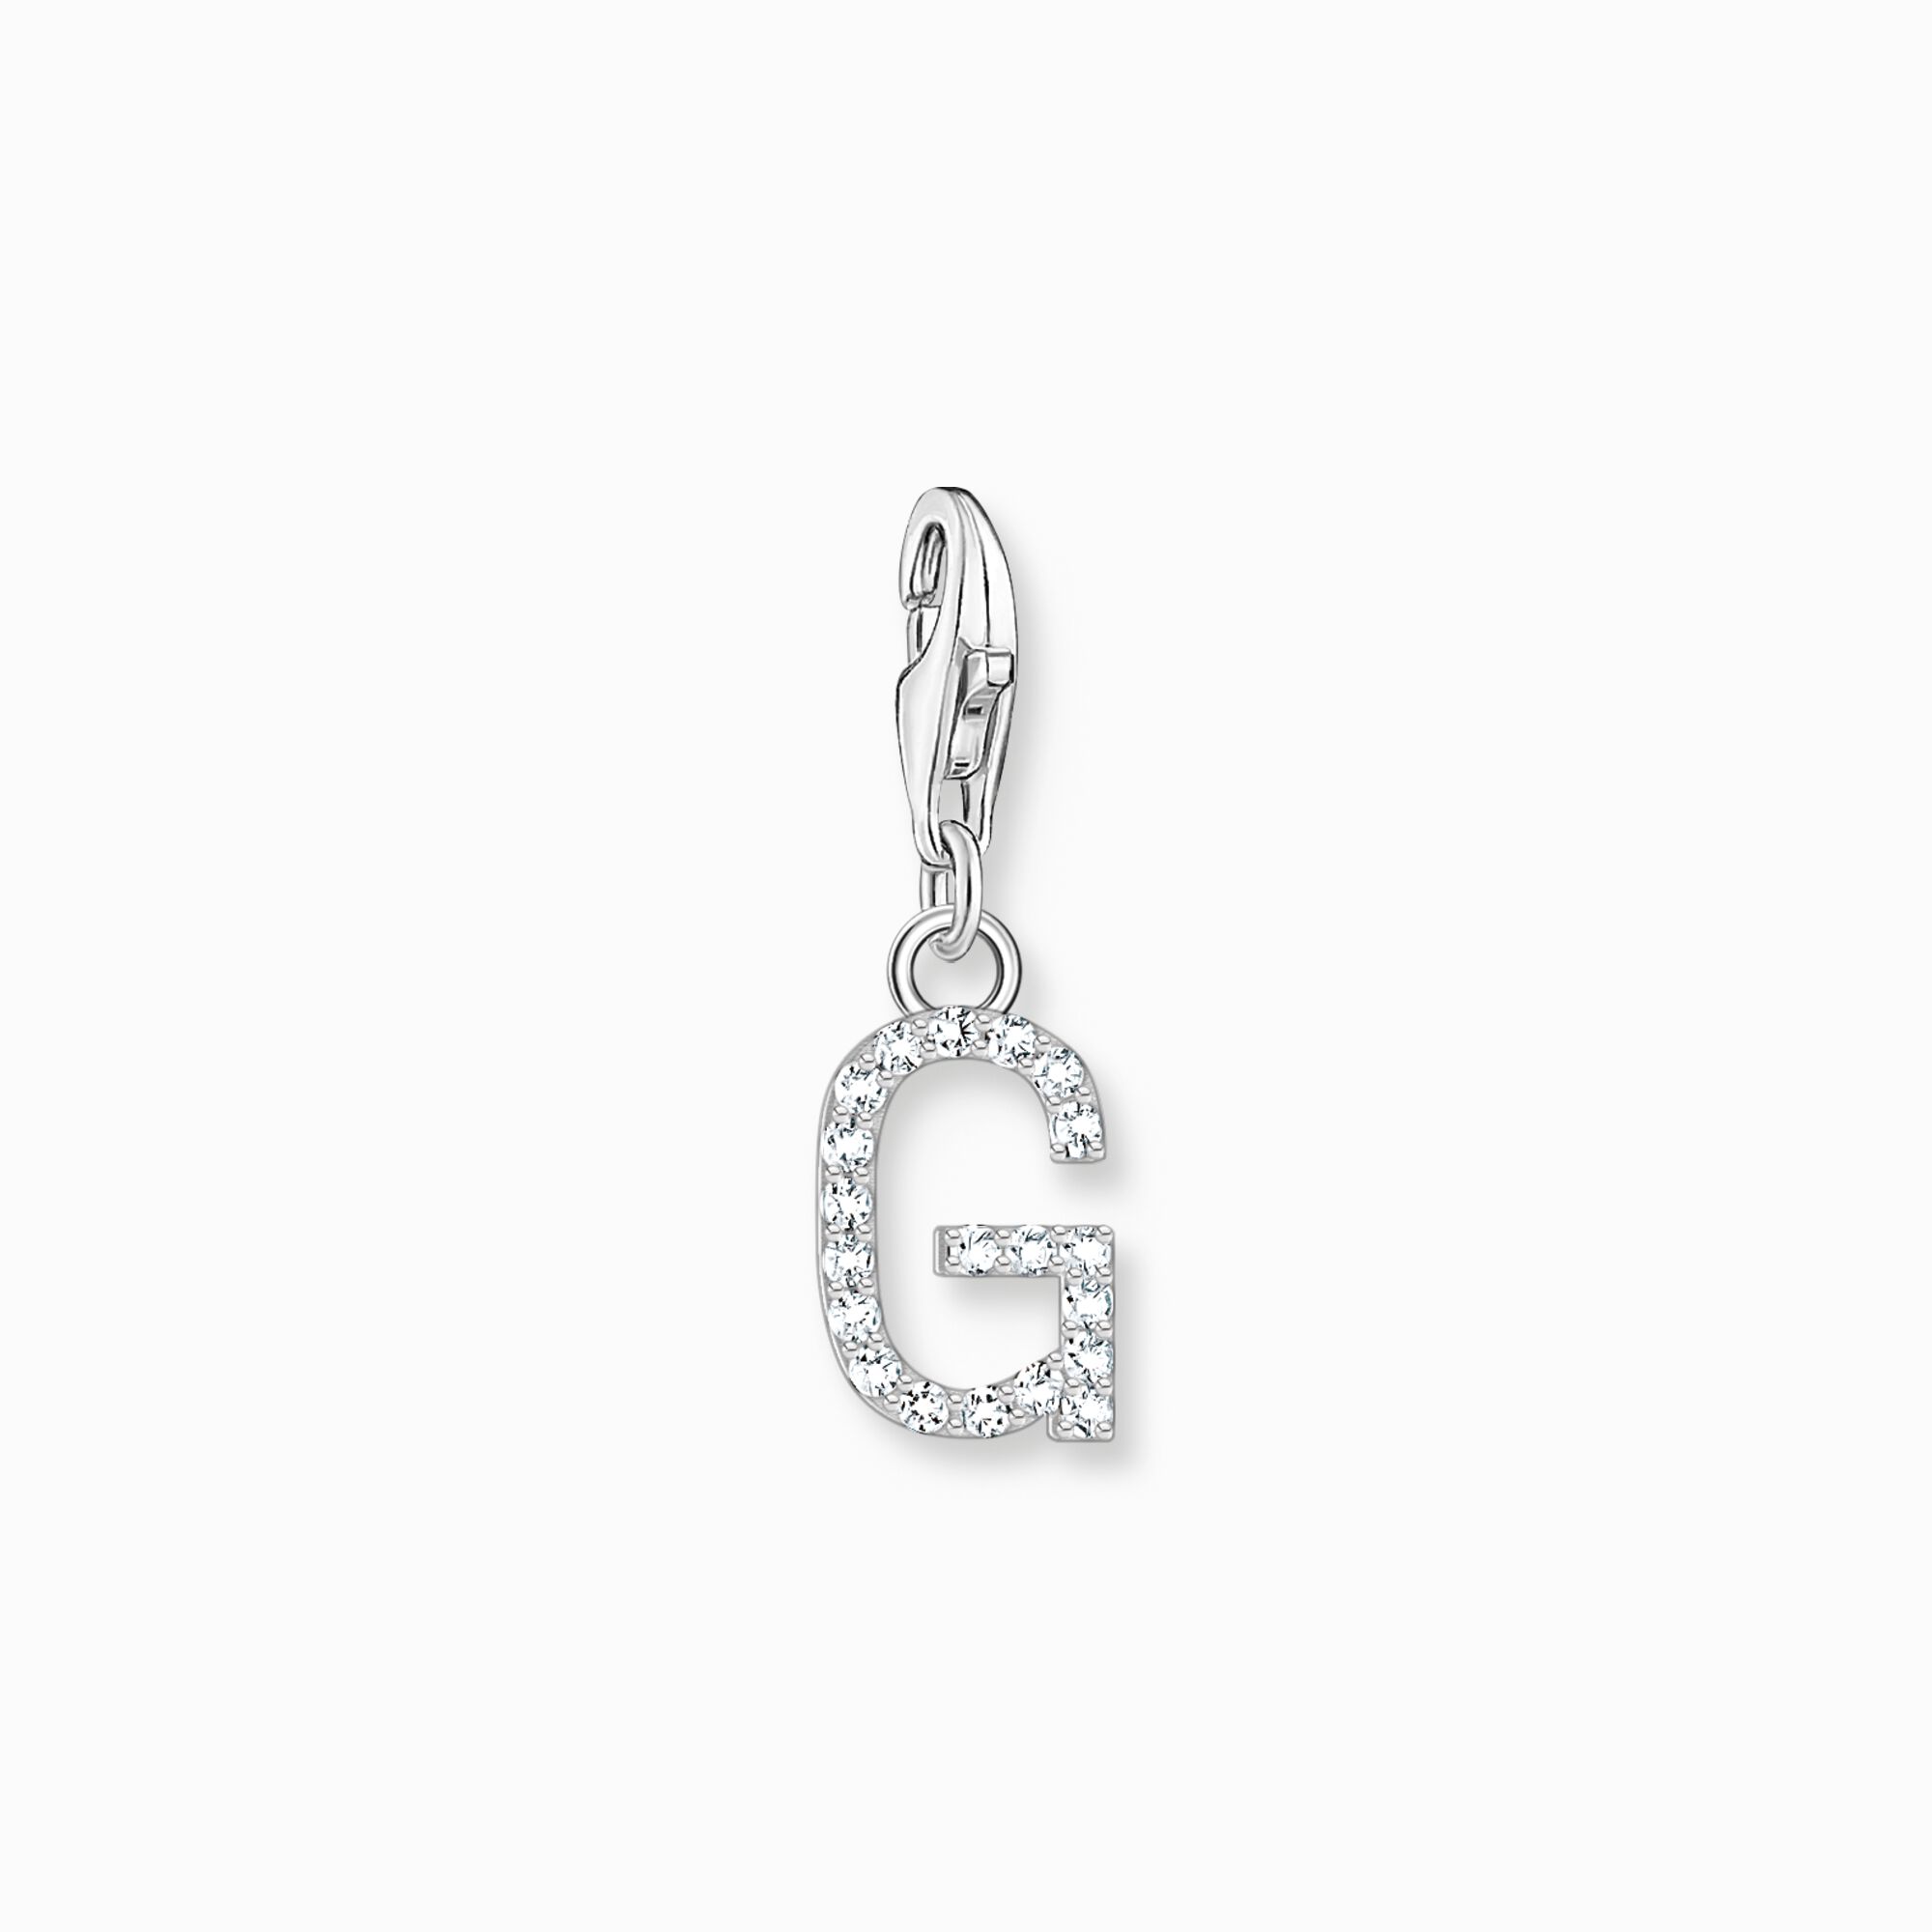 Charm pendant letter G with white stones silver from the Charm Club collection in the THOMAS SABO online store